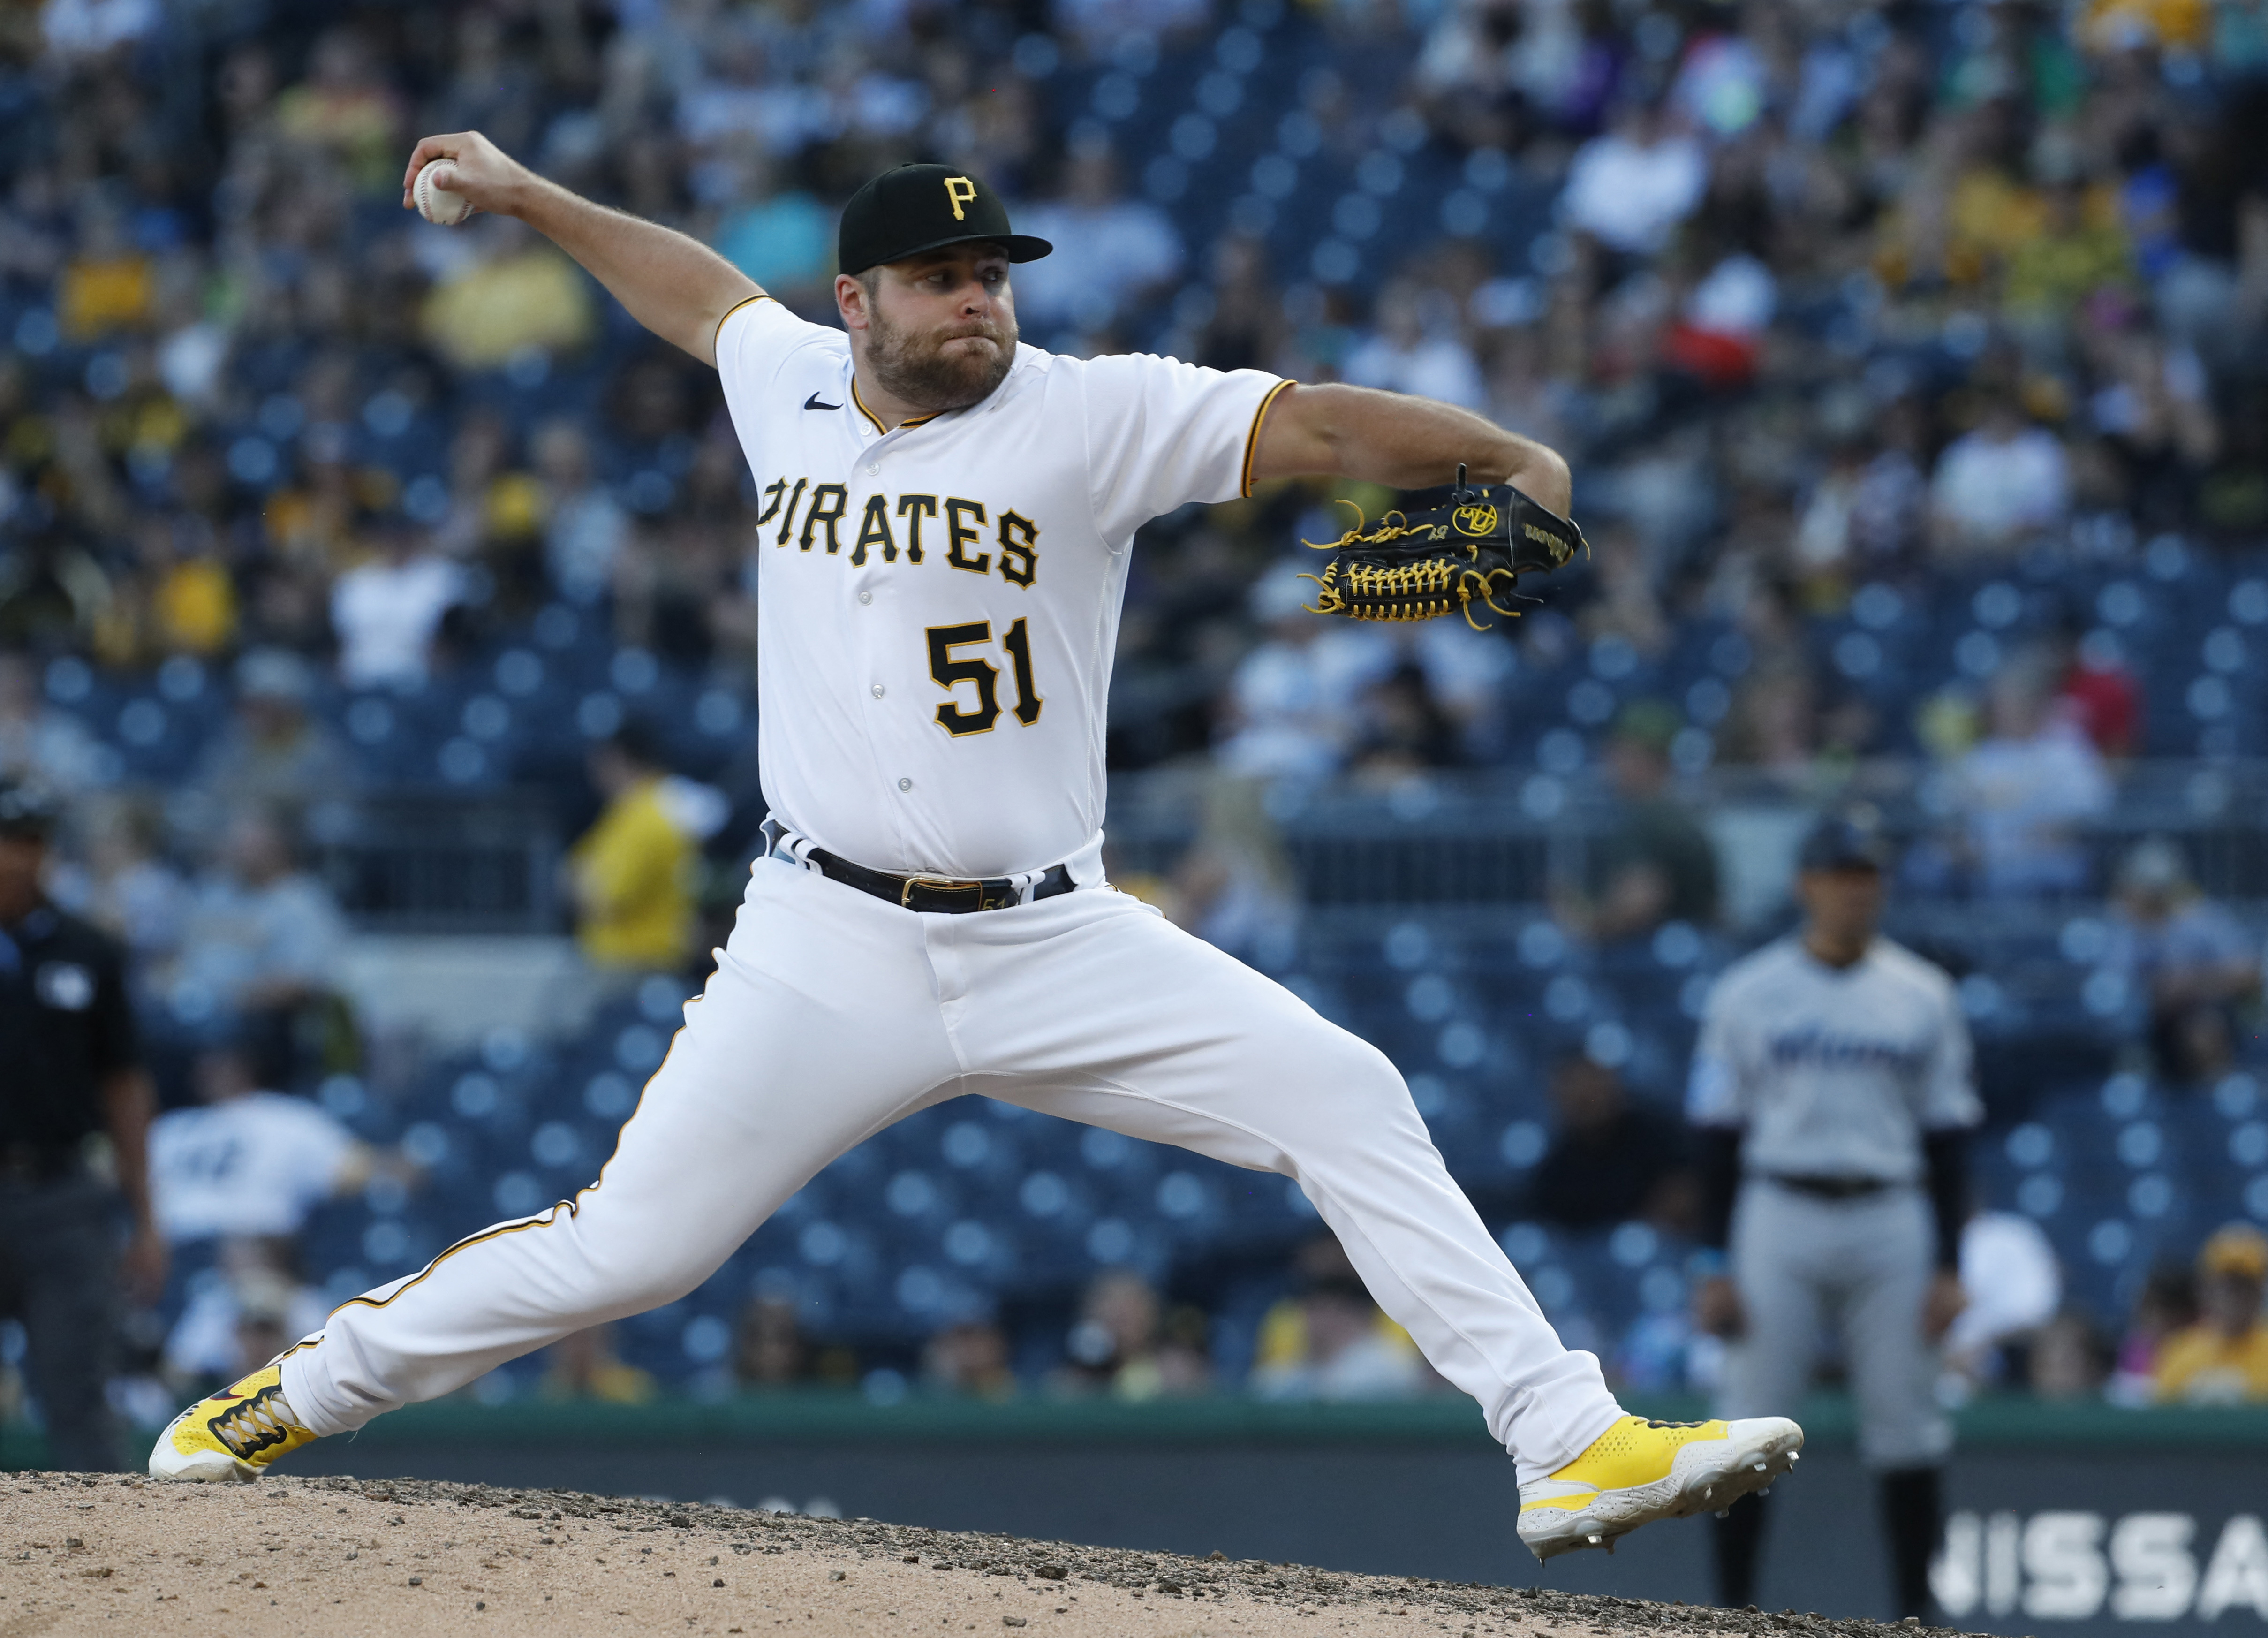 Pirates continue slide after 2-0 defeat to Marlins